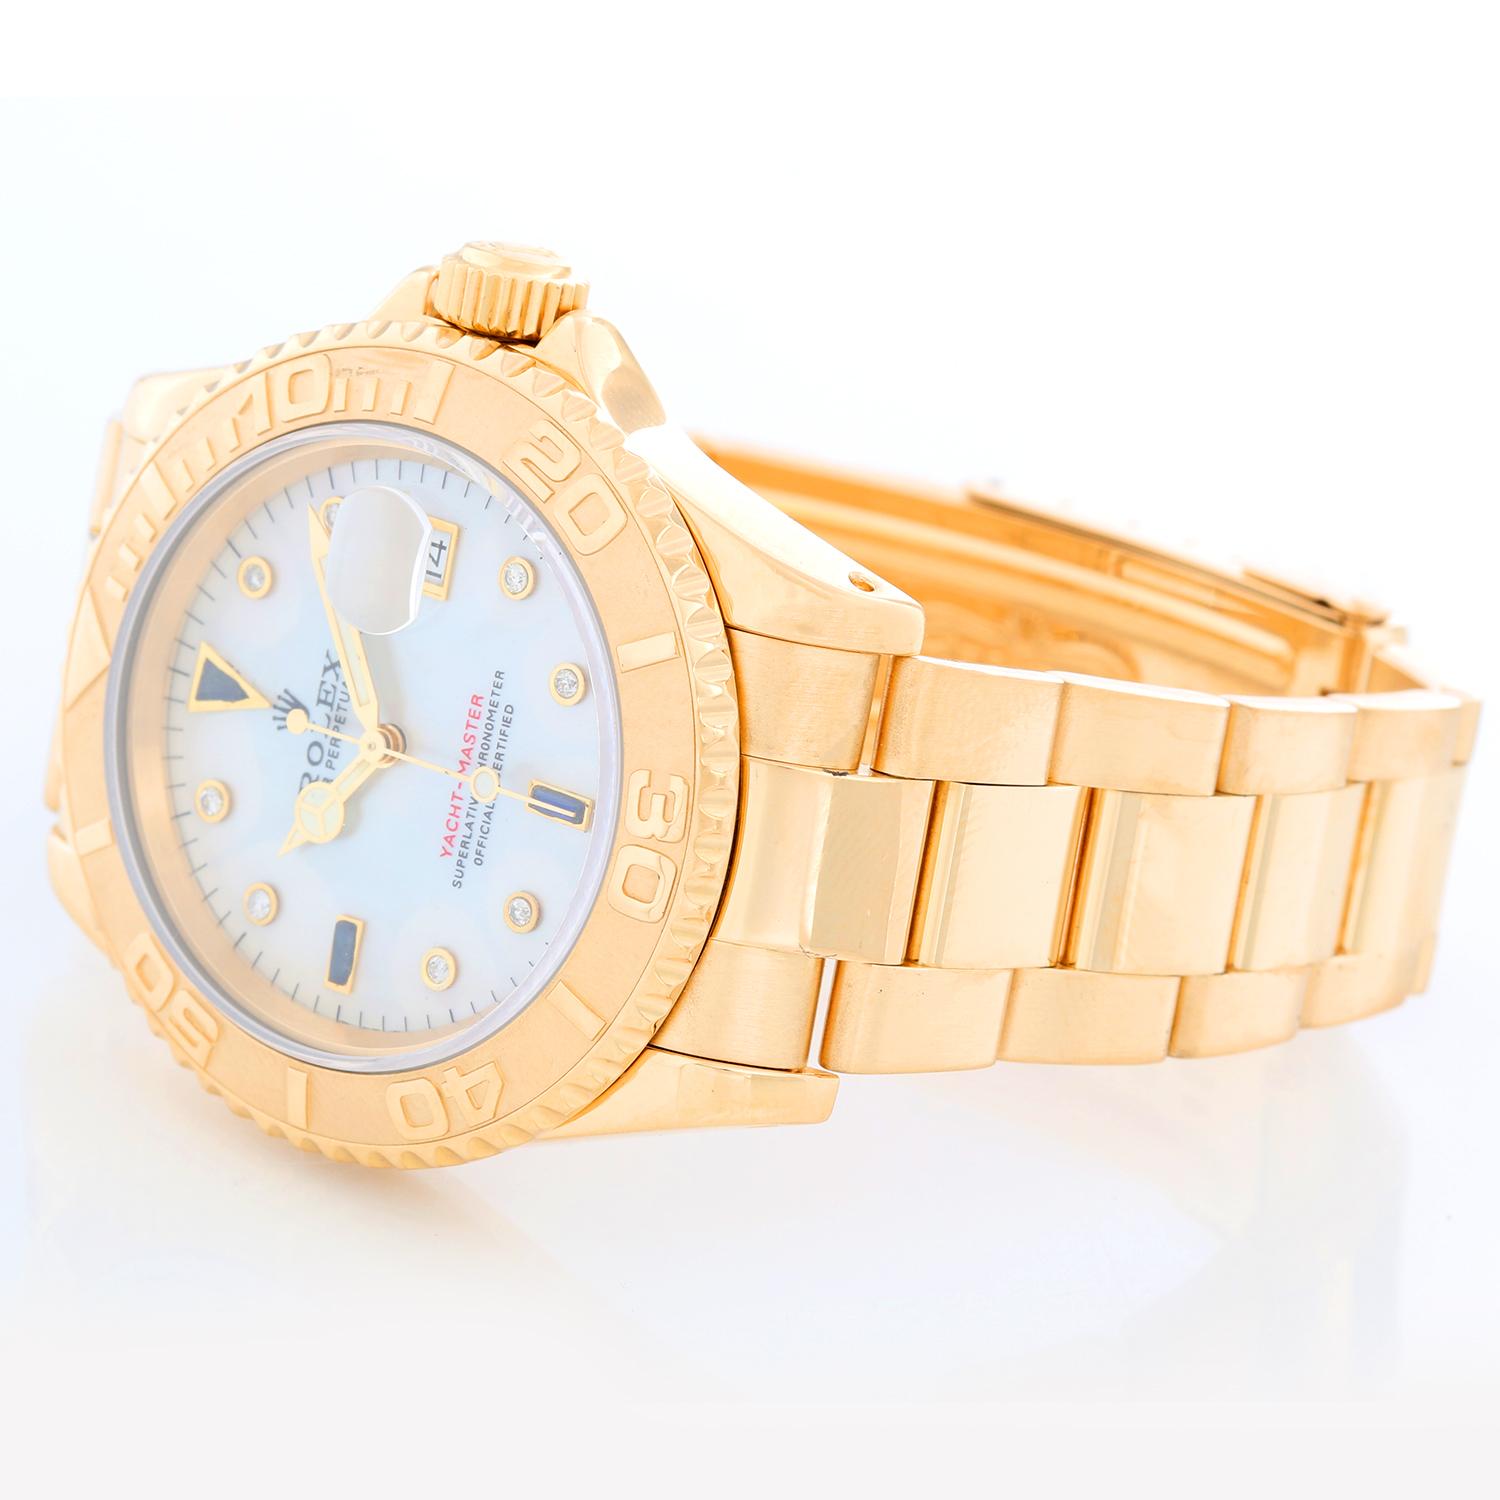 Rolex Yacht-Master Men's 18k Yellow Gold Watch Mother of Pearl 16628 - Automatic winding, 31 jewels, Quickset, sapphire crystal. 18k yellow gold case and bezel  (40mm diameter). Mother of Pearl with diamond and sapphire hour markers. 18k yellow gold